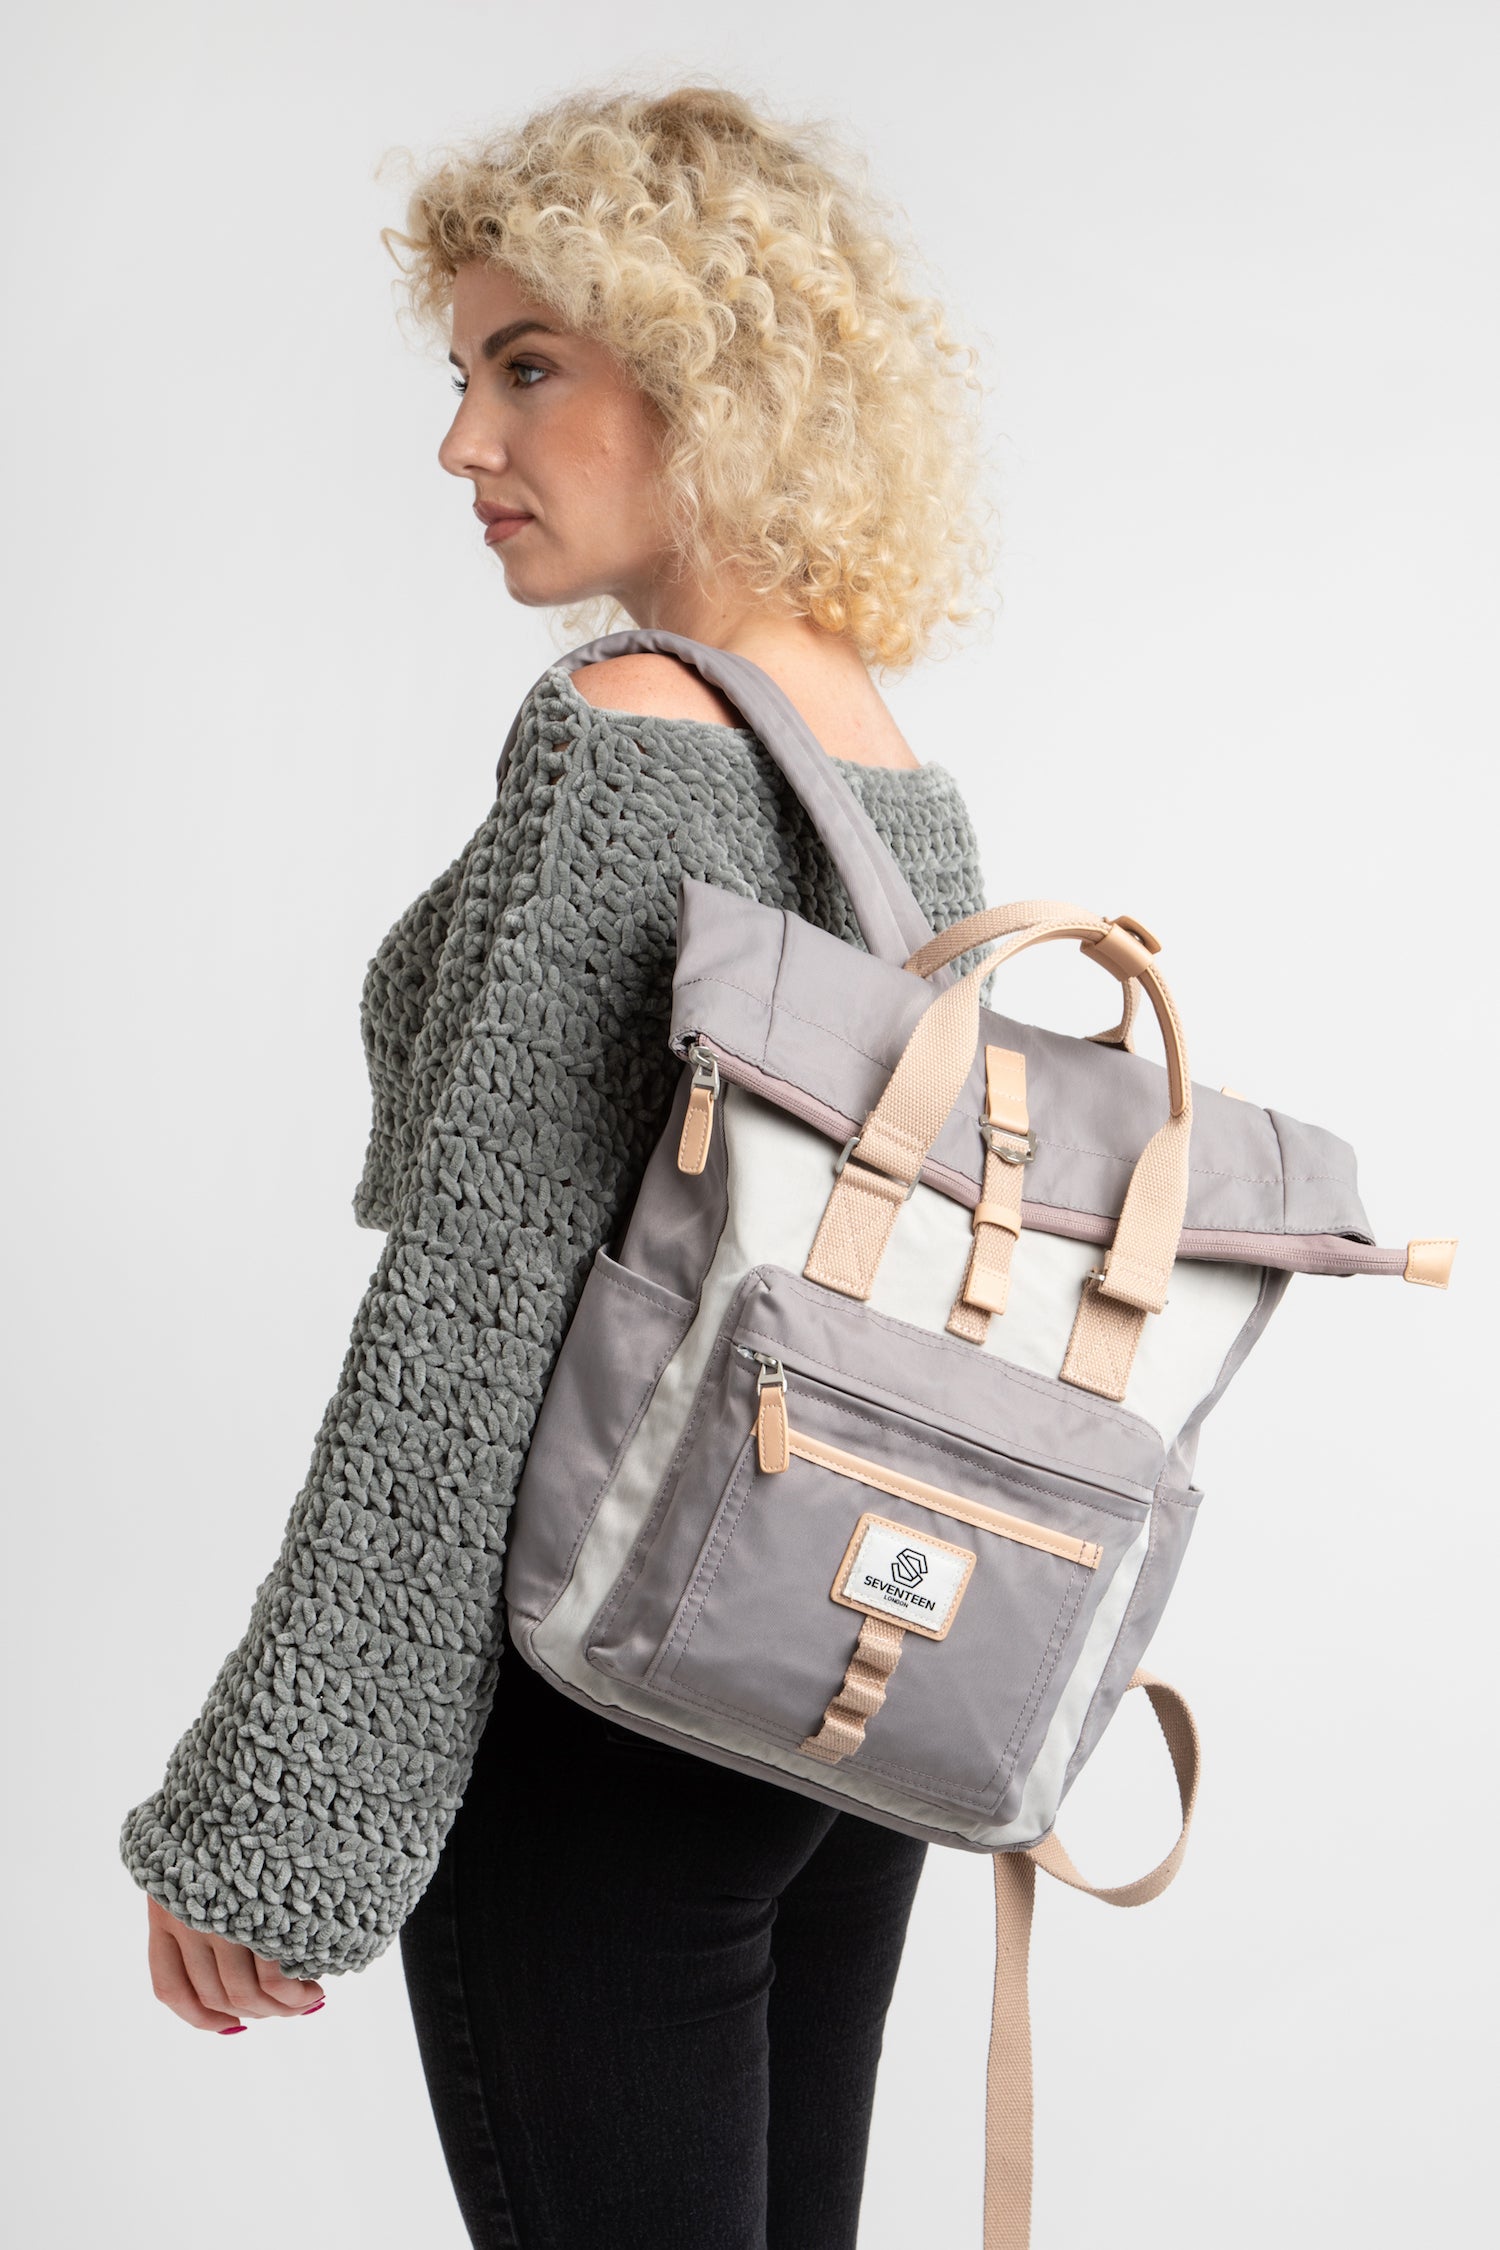 Canary Wharf Backpack - Grey with Cream